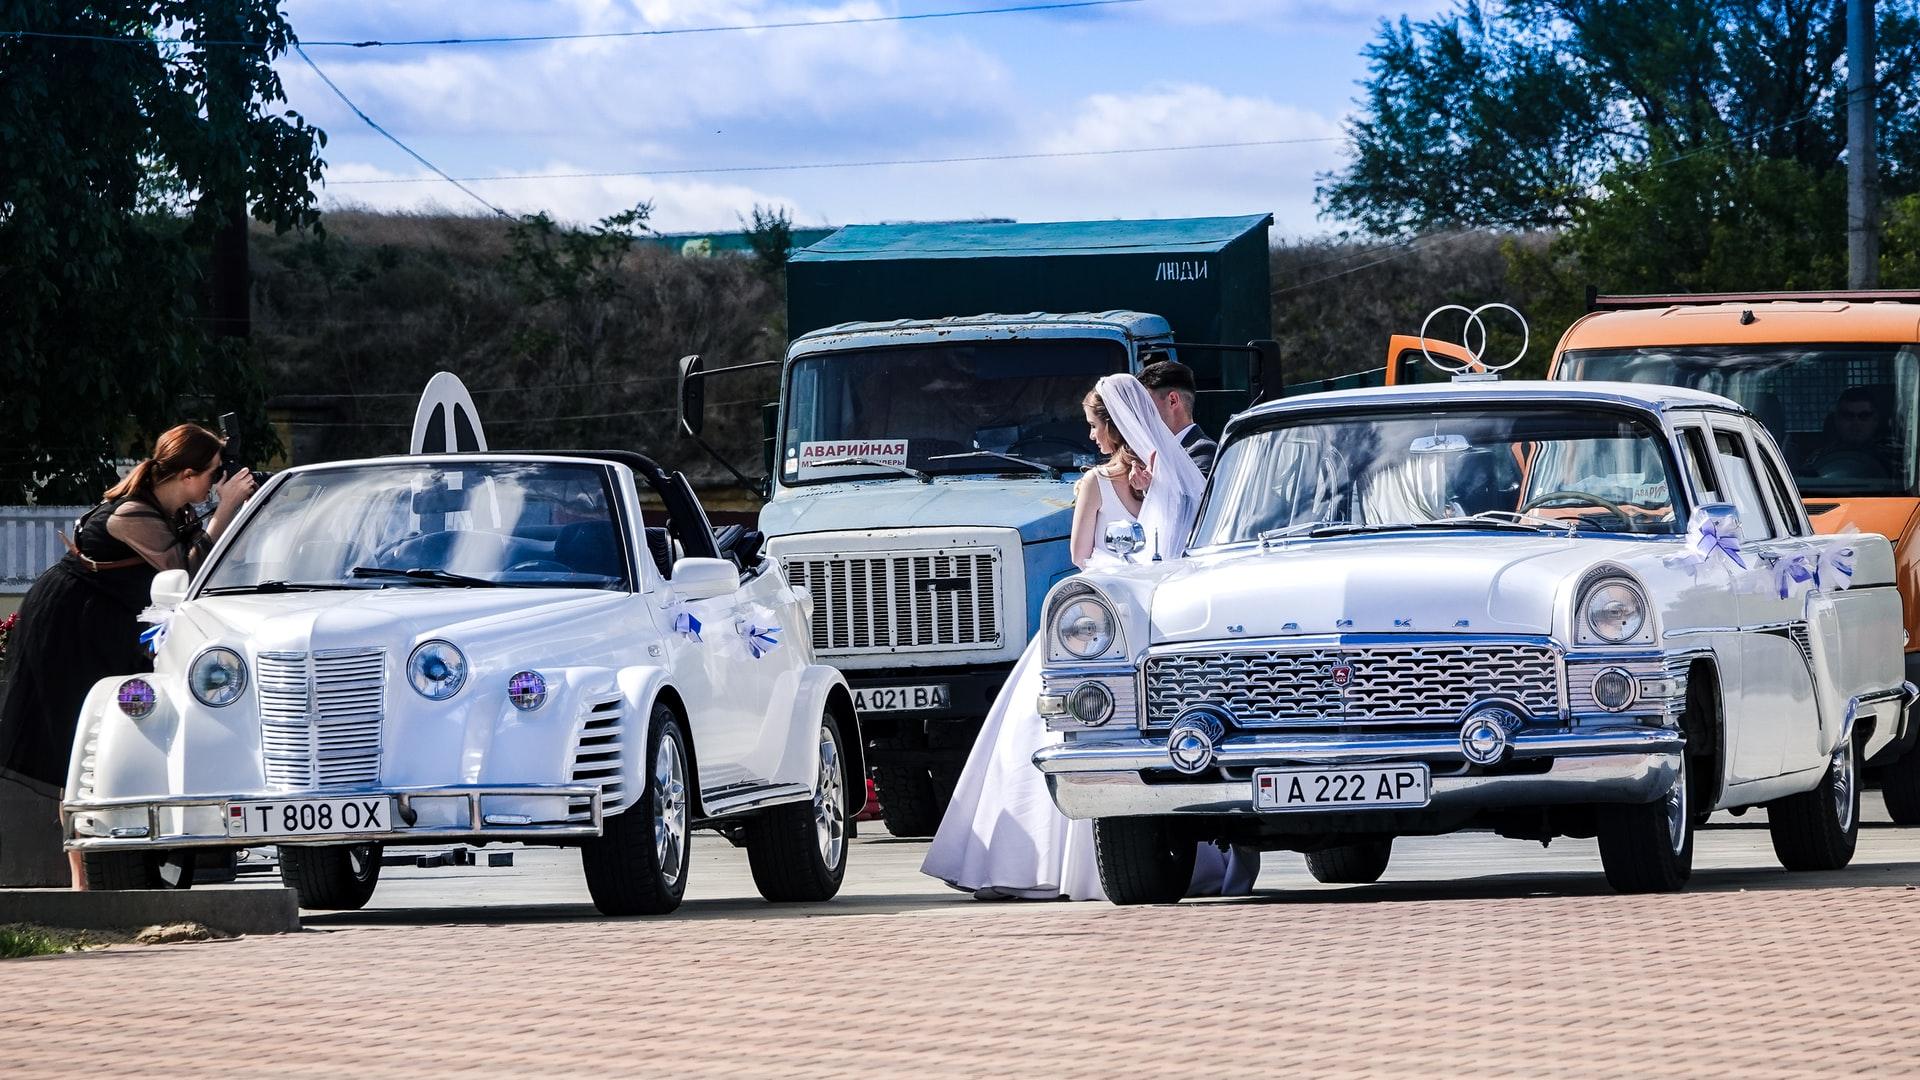 The tradition of tying cans to the back of a wedding car draws its roots to France.